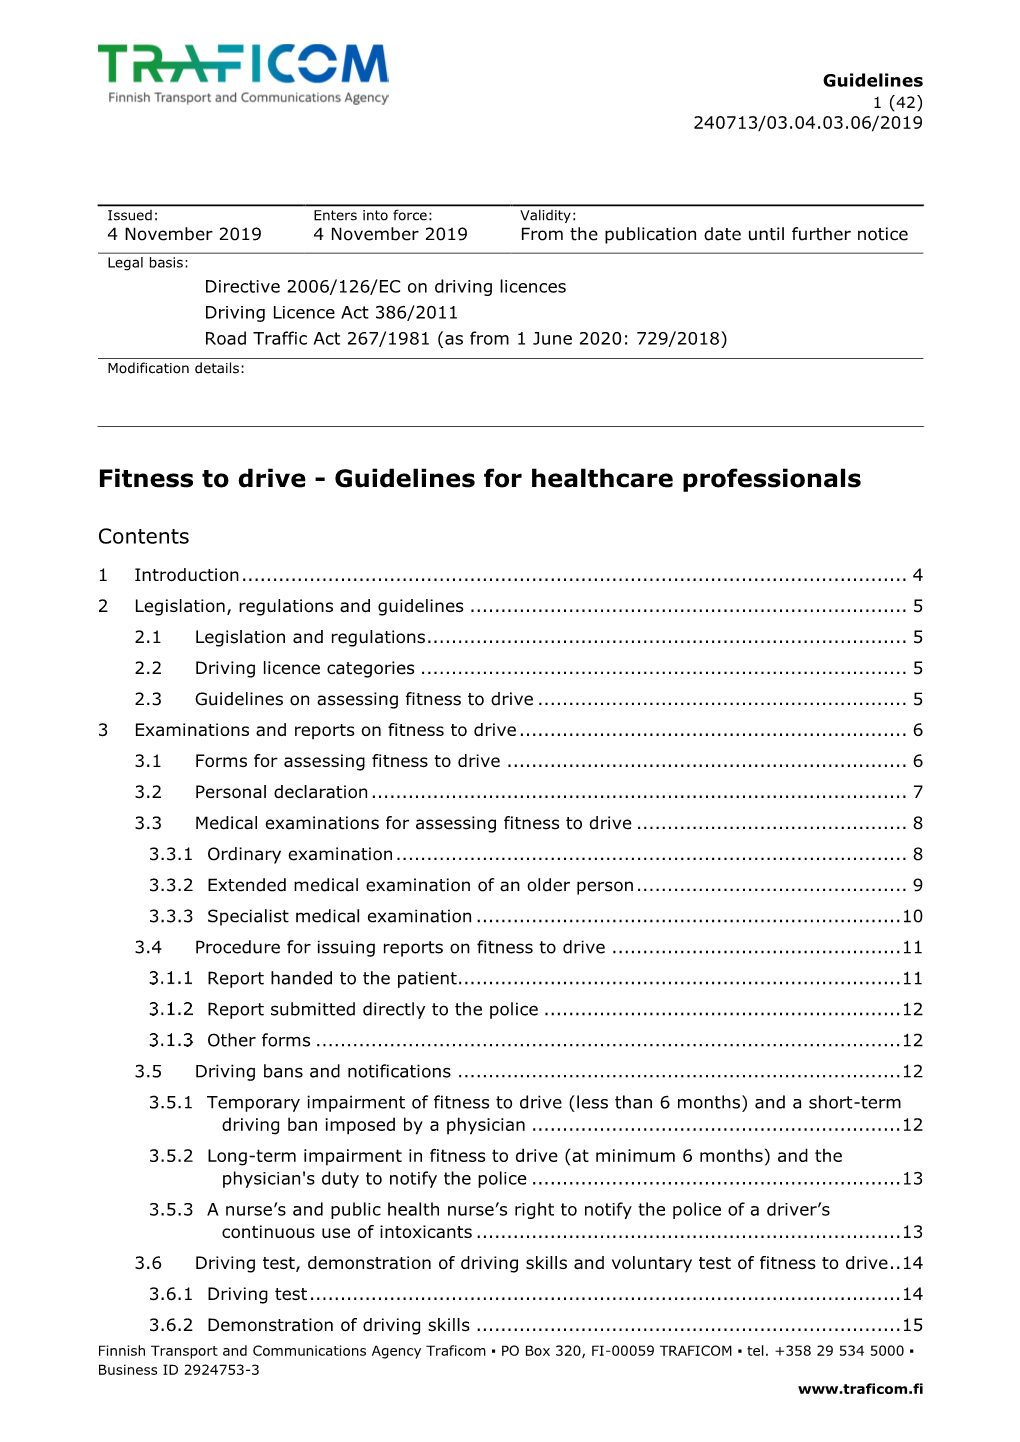 Fitness to Drive - Guidelines for Healthcare Professionals